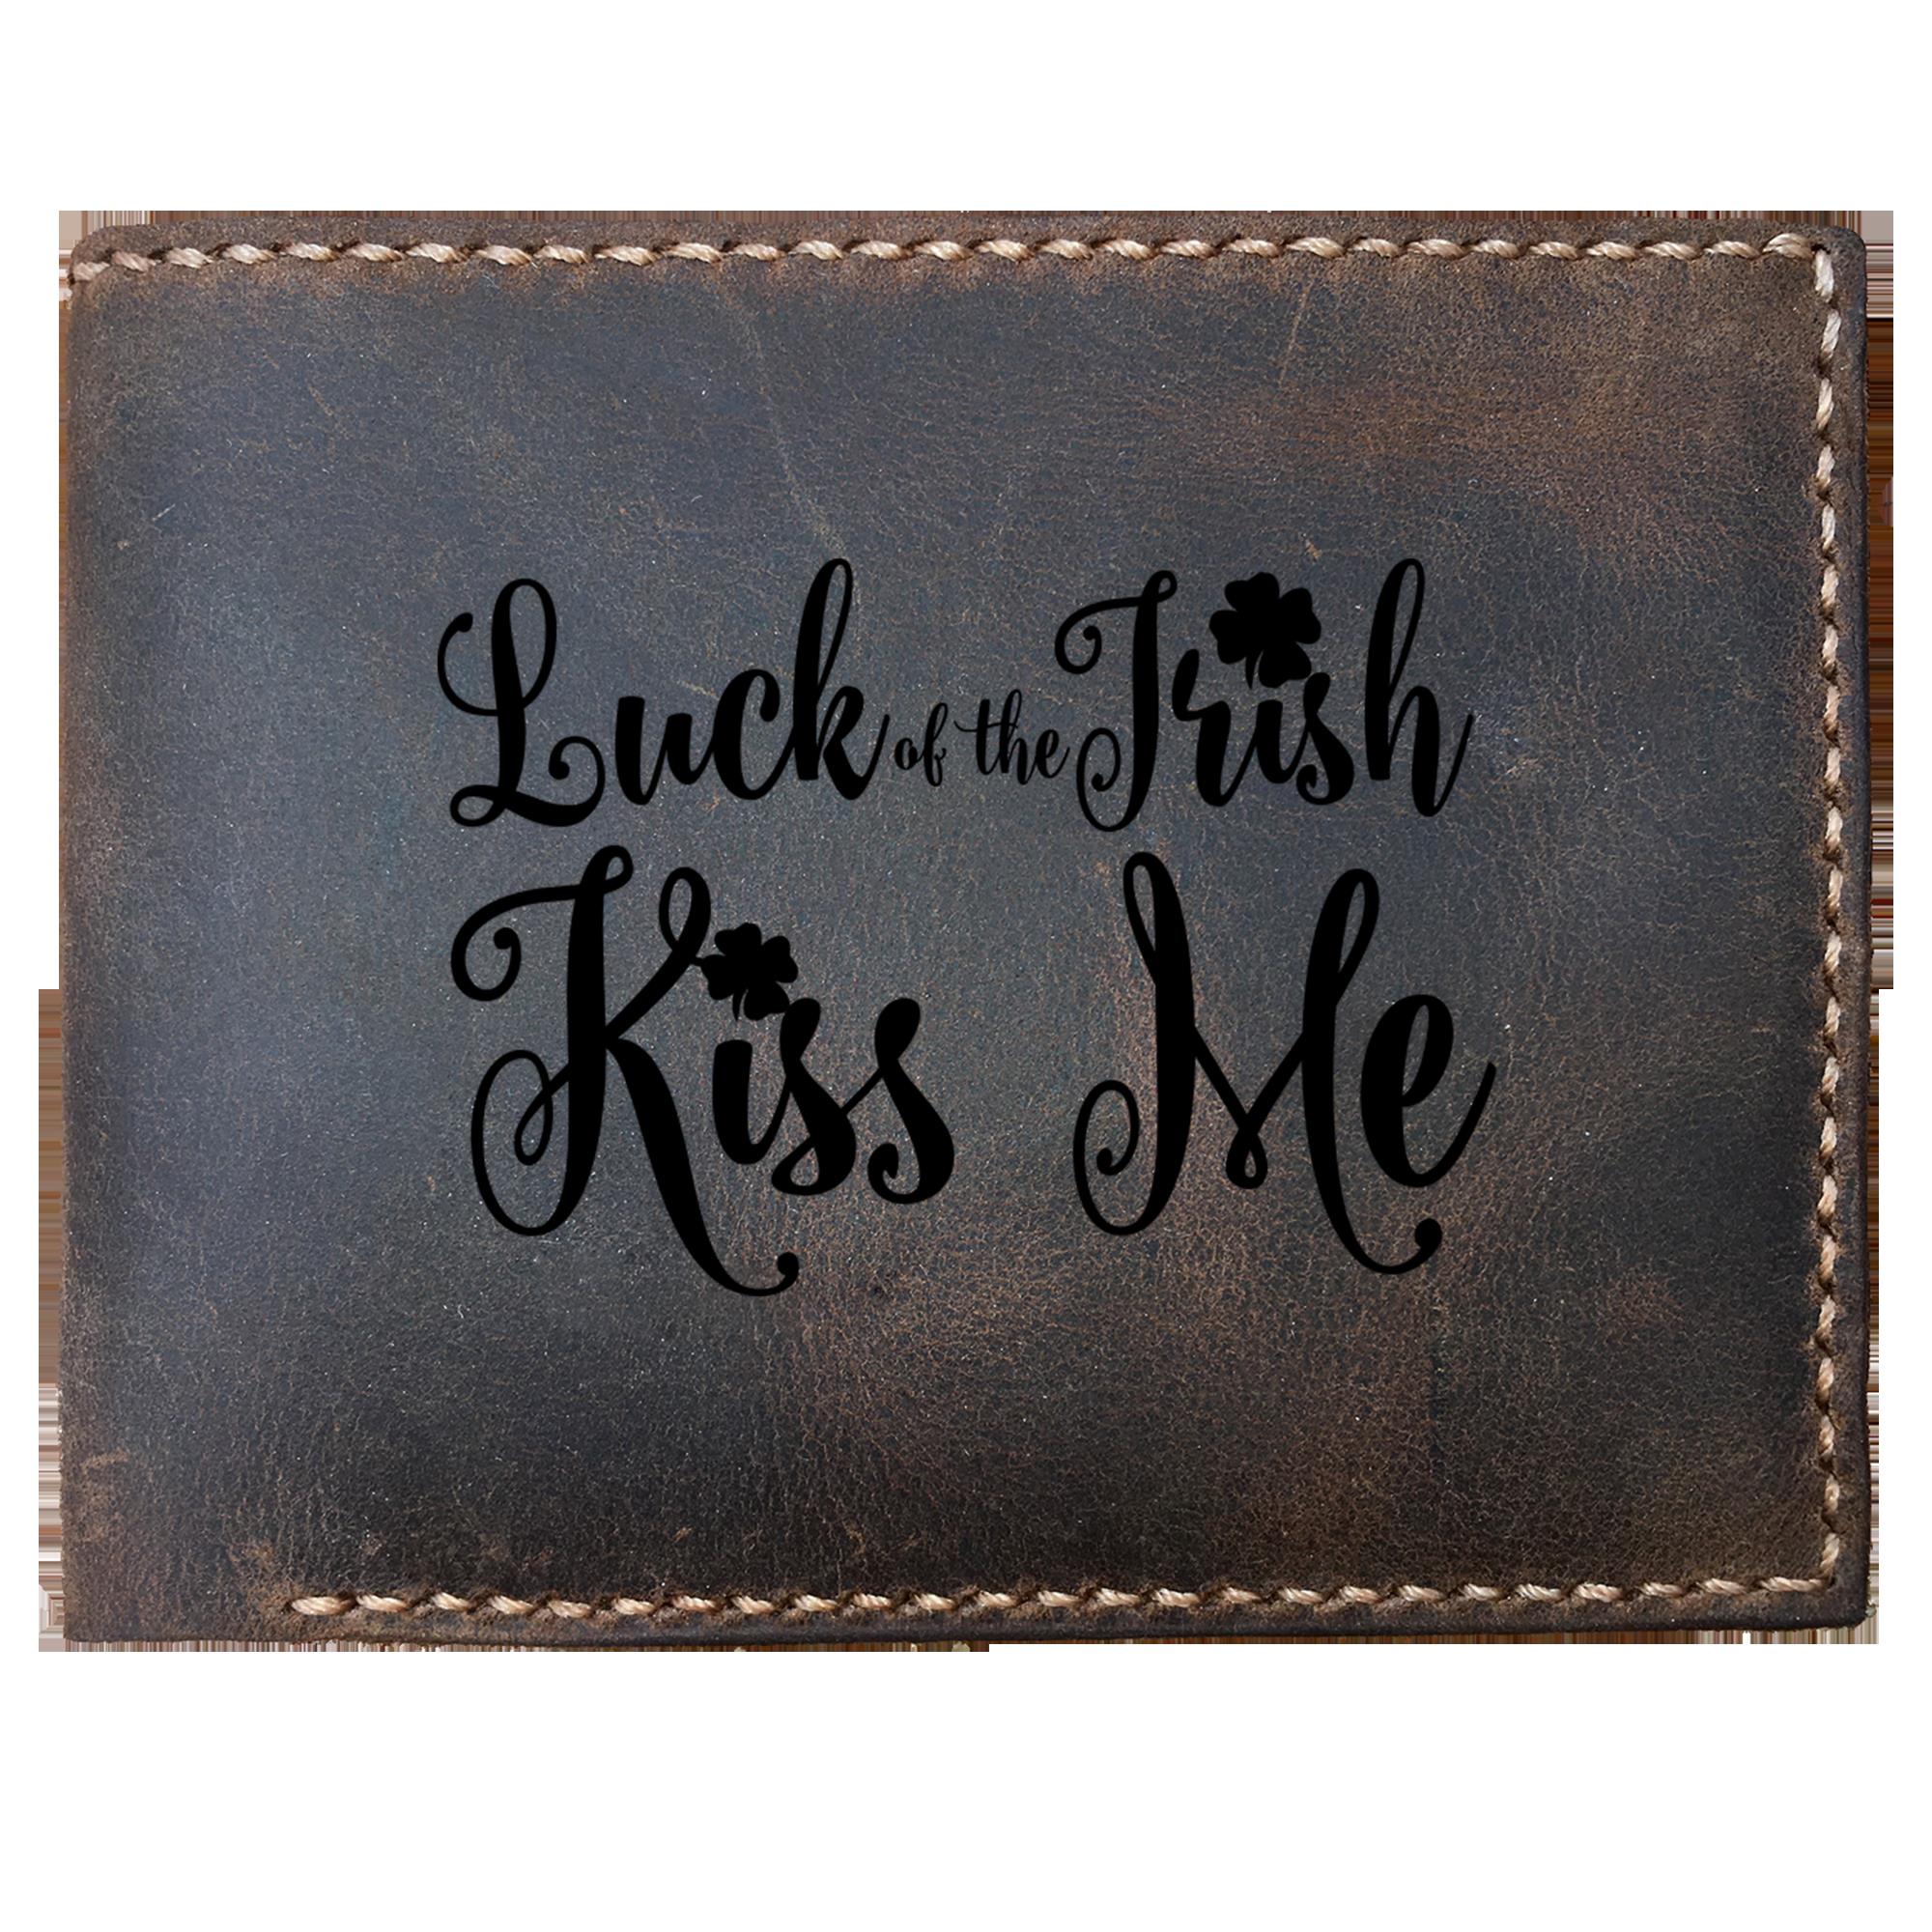 Skitongifts Funny Custom Laser Engraved Bifold Leather Wallet For Men, Luck Of The Irish Kiss Me